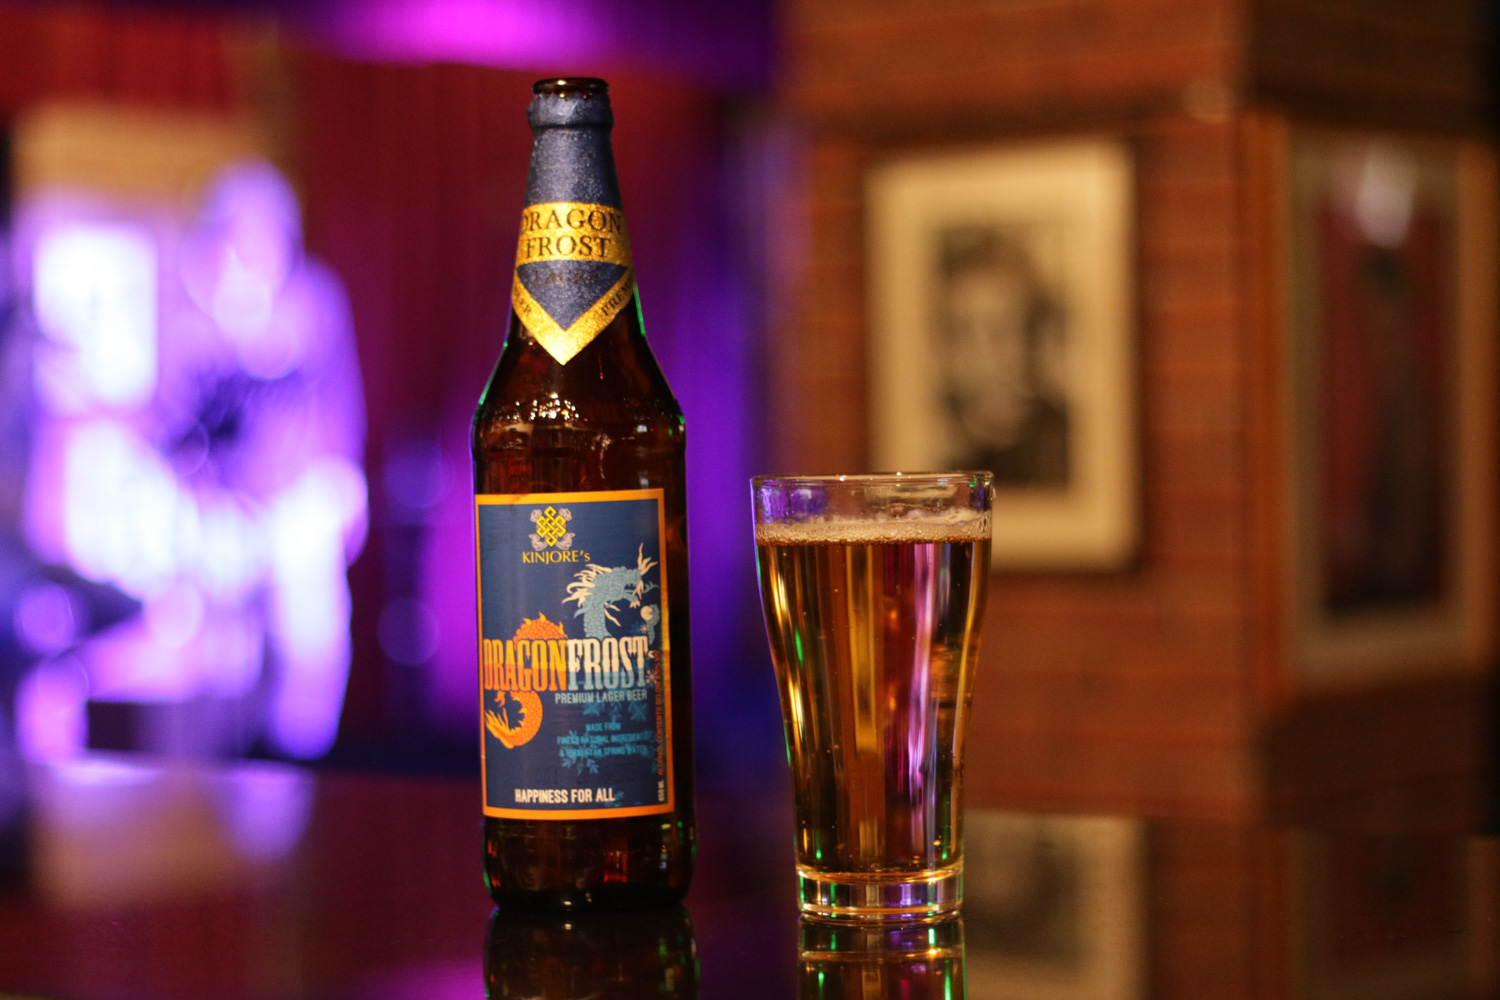 DragonFrost got the coolest name of all beers in Bhutan, but it´s not the best tasting one.